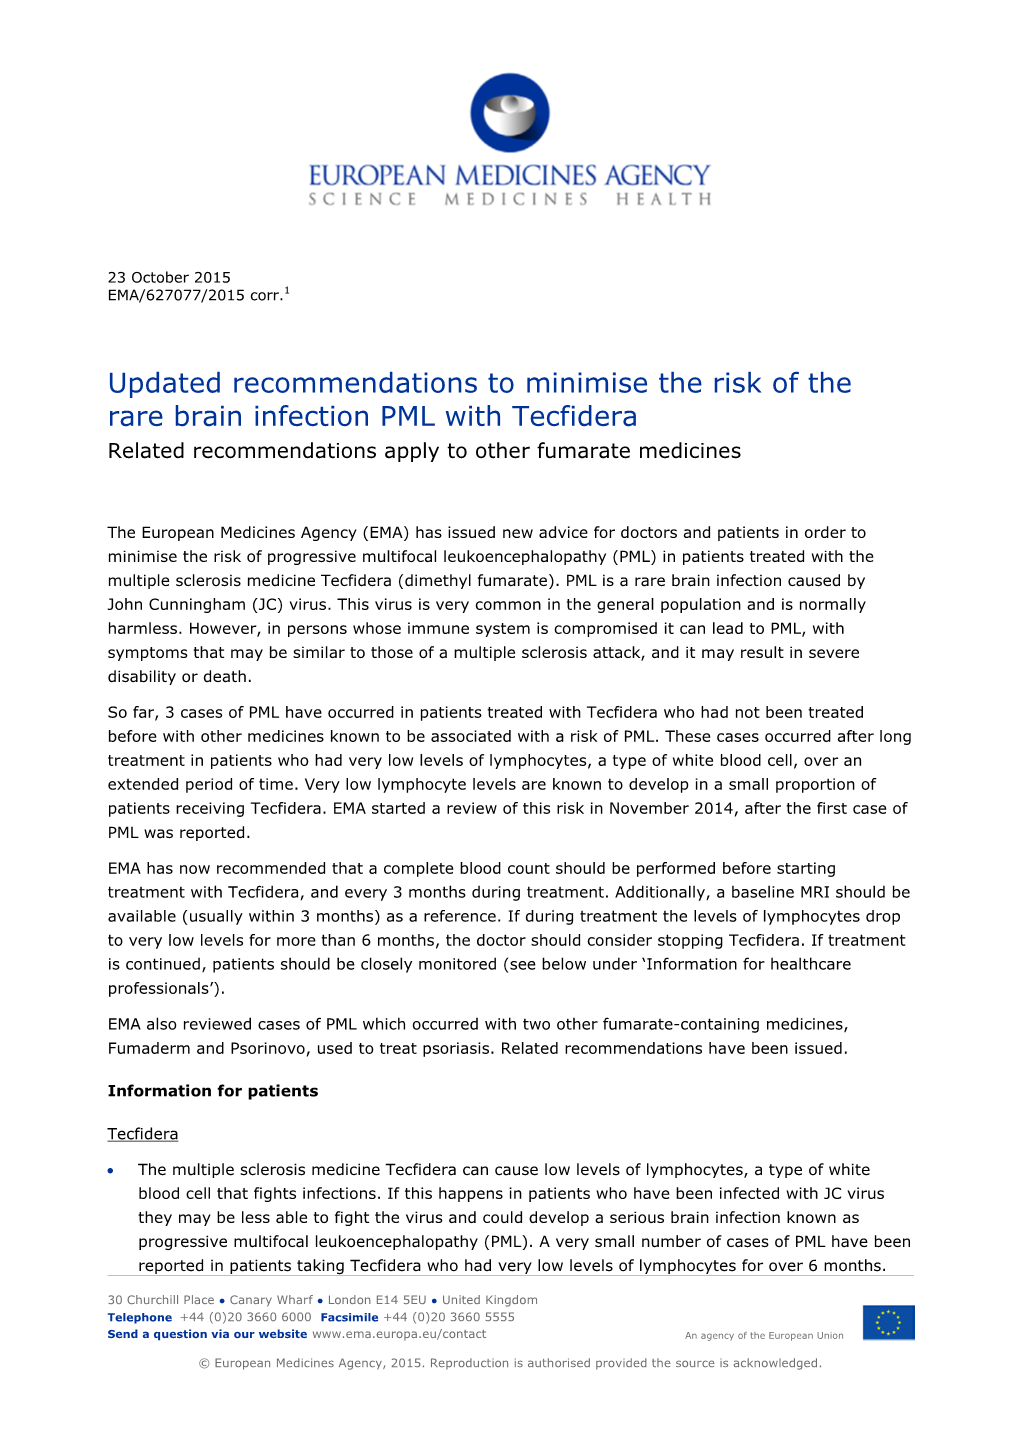 Updated Recommendations to Minimise the Risk of the Rare Brain Infection PML with Tecfidera Related Recommendations Apply to Other Fumarate Medicines